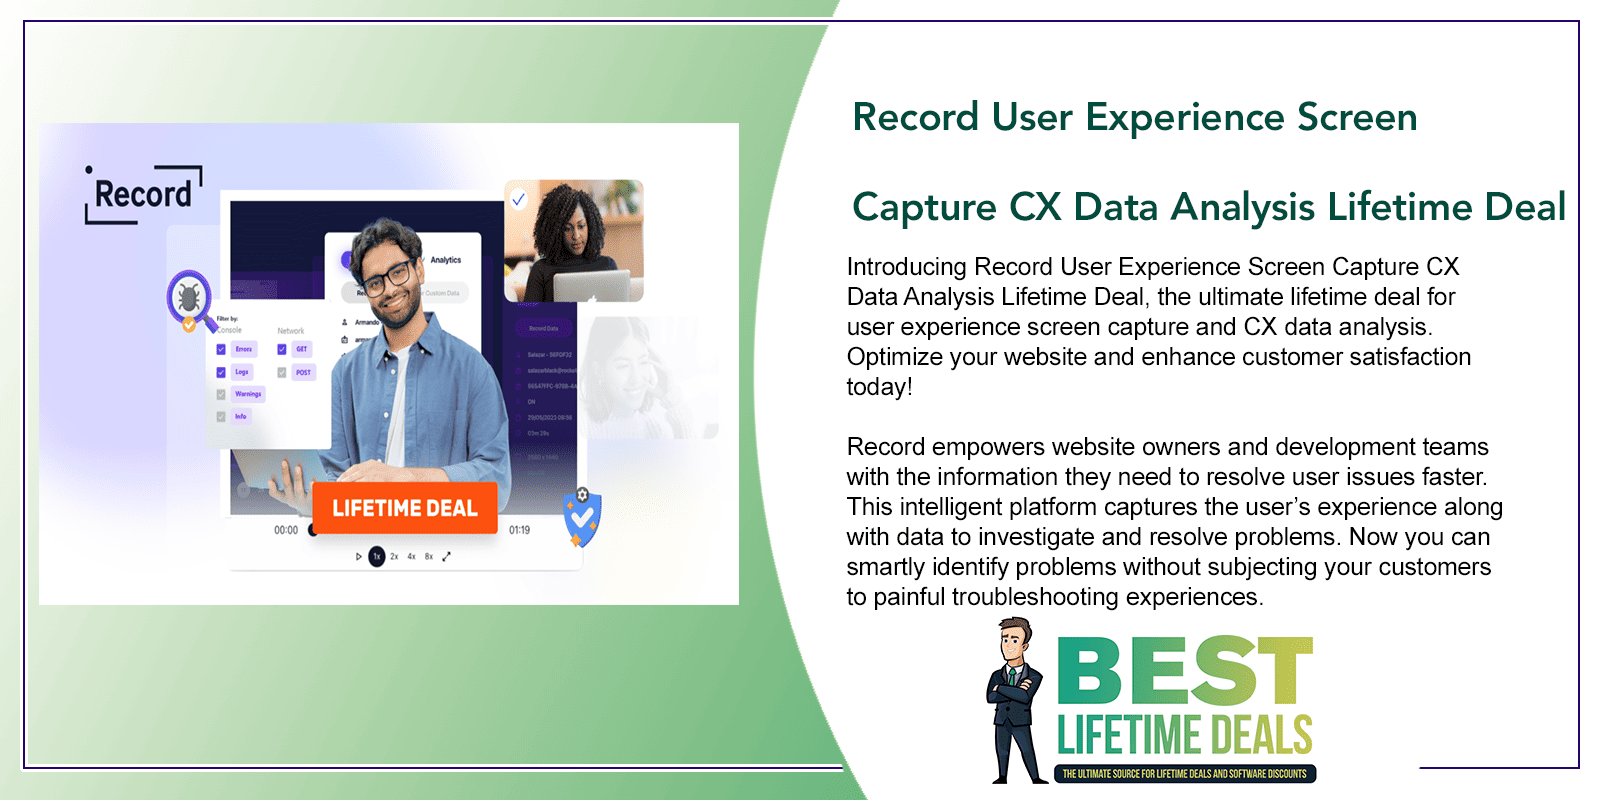 Record User Experience Screen Capture CX Data Analysis Lifetime Deal Featured Image